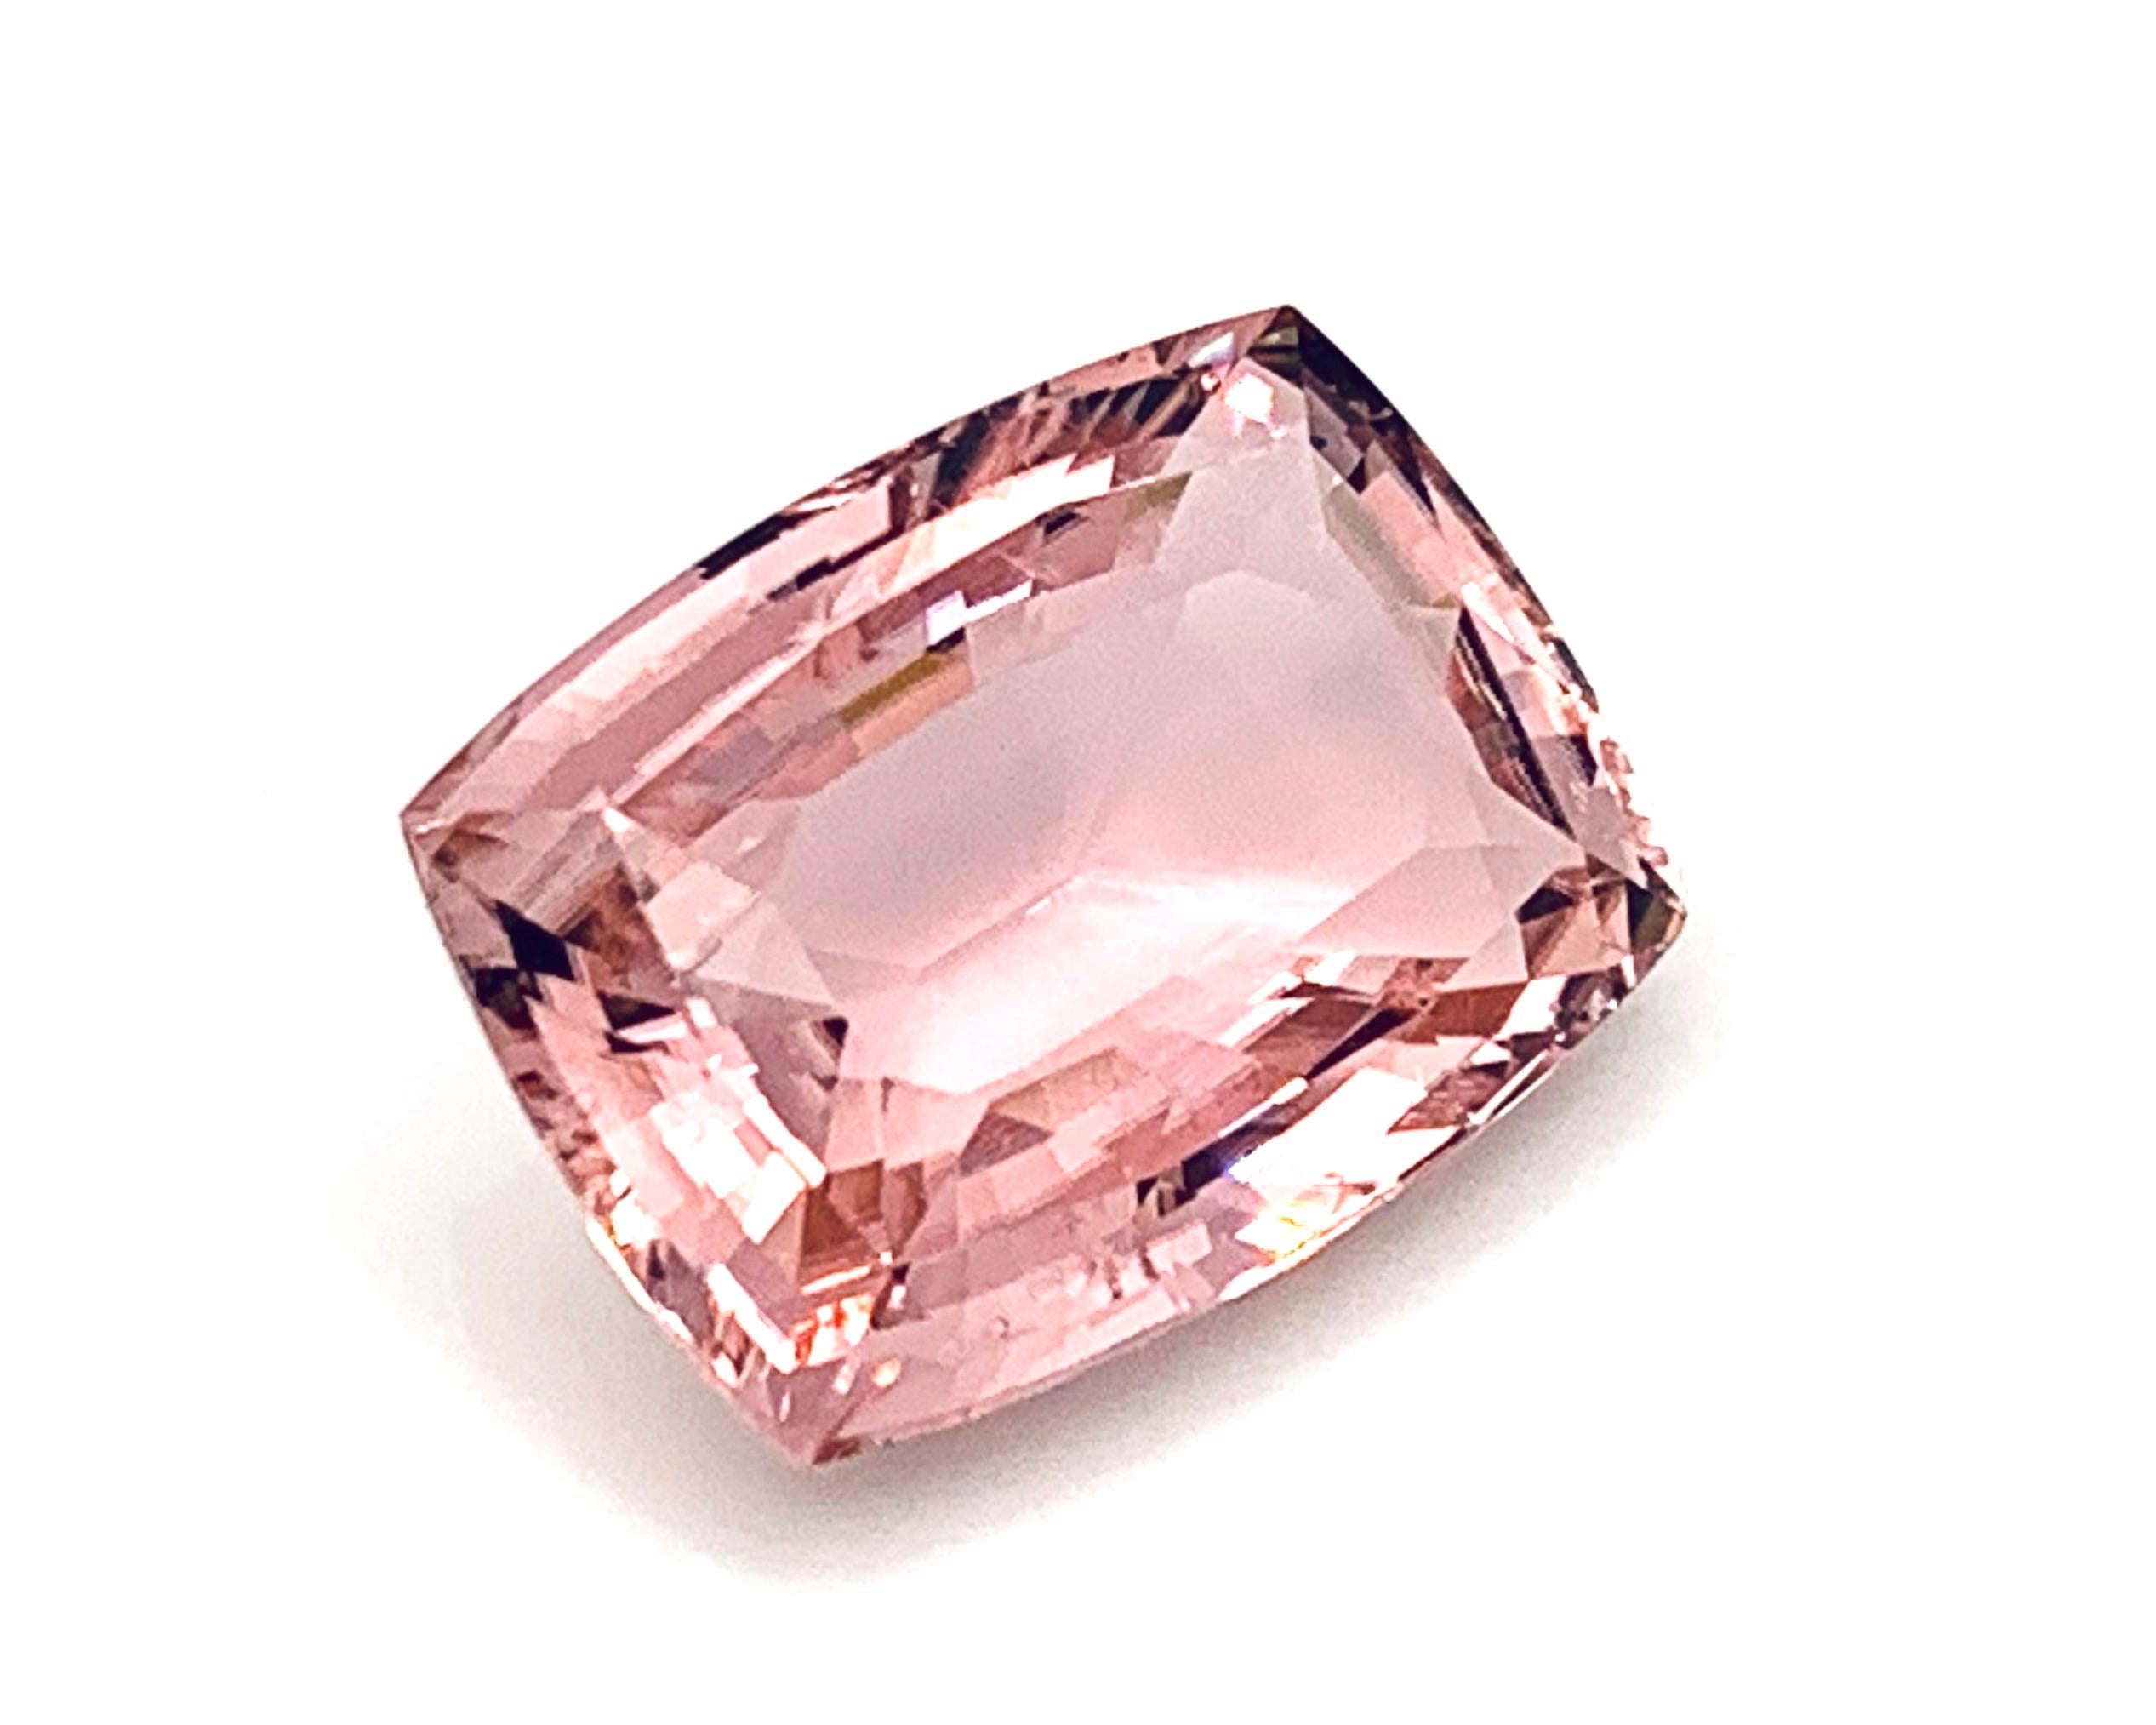 This lovely pink tourmaline will remind you of cherry blossoms in the spring! It is delicate in color yet bright and lively, with extraordinary luster not often seen in tourmaline. With a face up appearance of a stone even larger than its 21.90